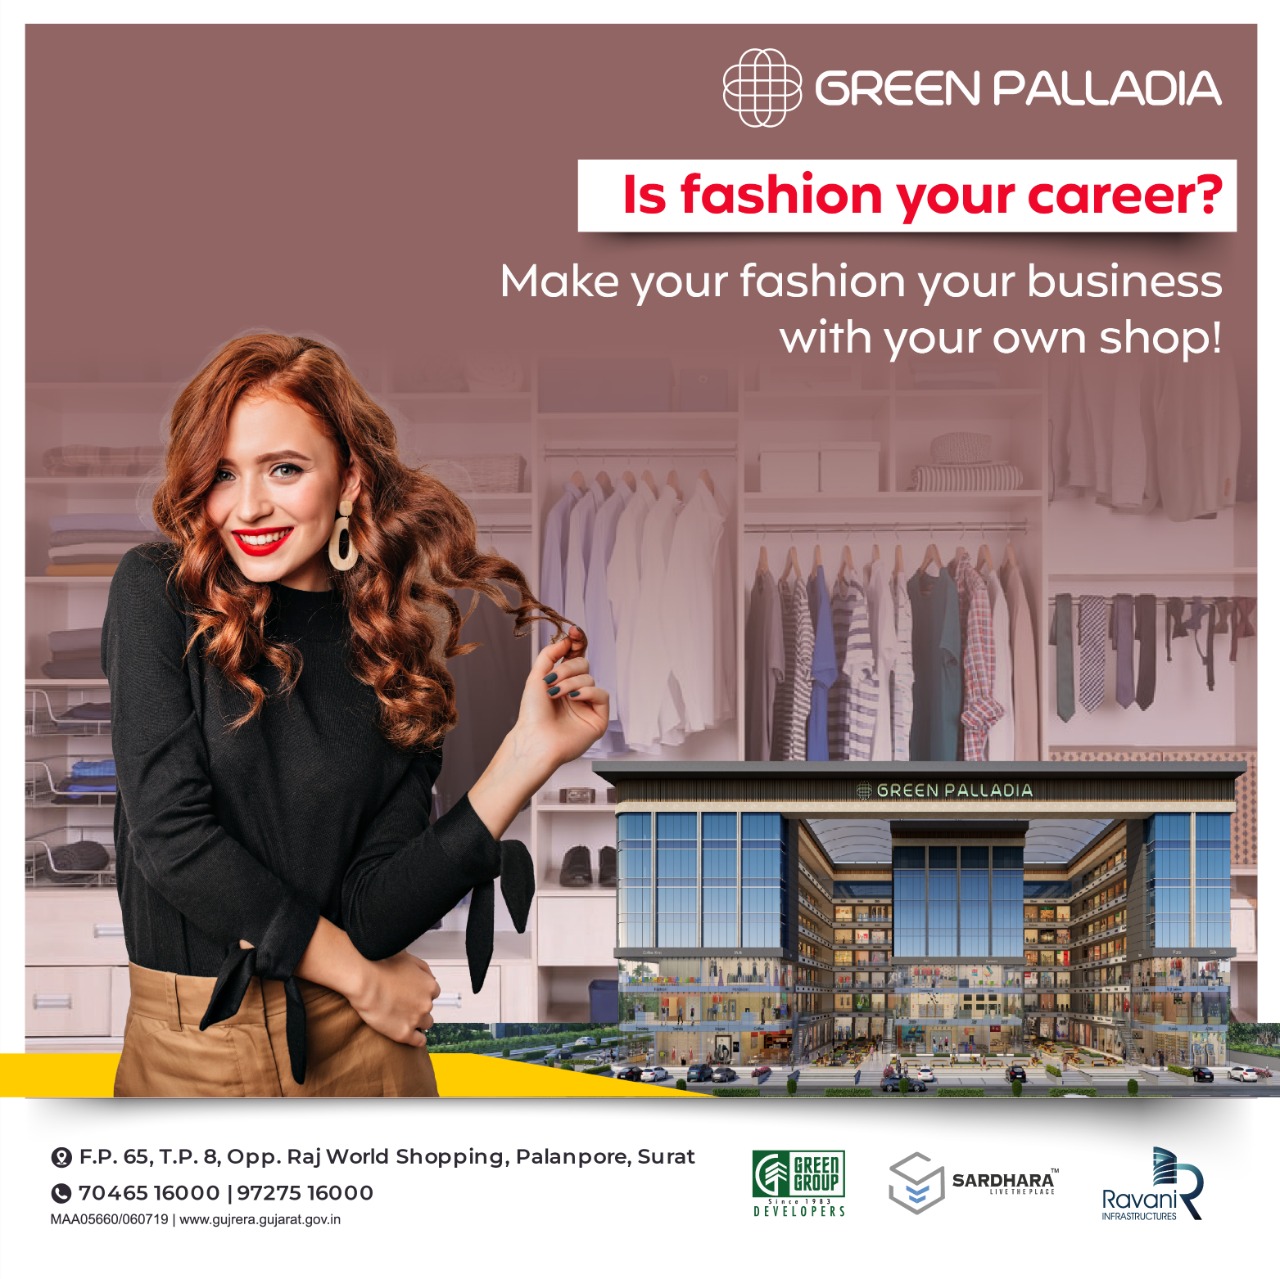 green-palladia-make-your-fashion-your-business